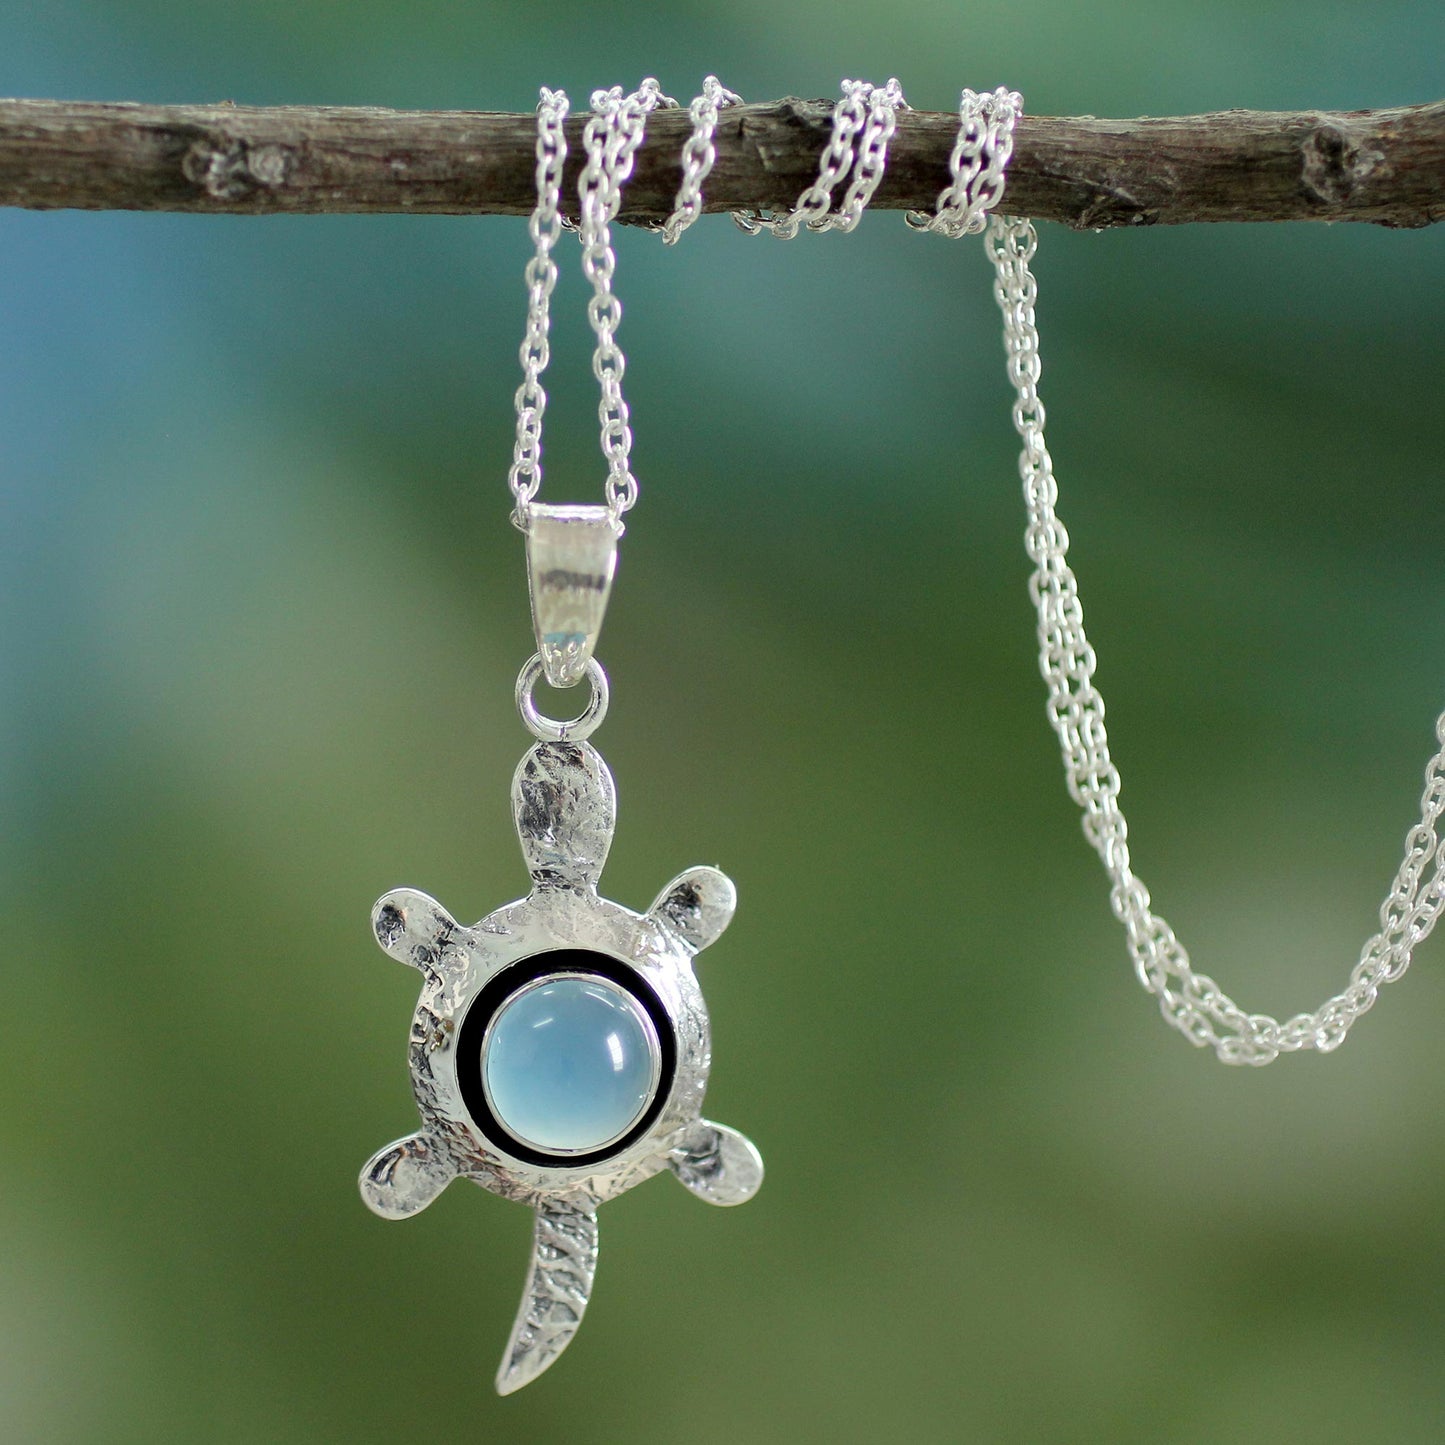 Turtle Wisdom Chalcedony and Silver Pendant Necklace